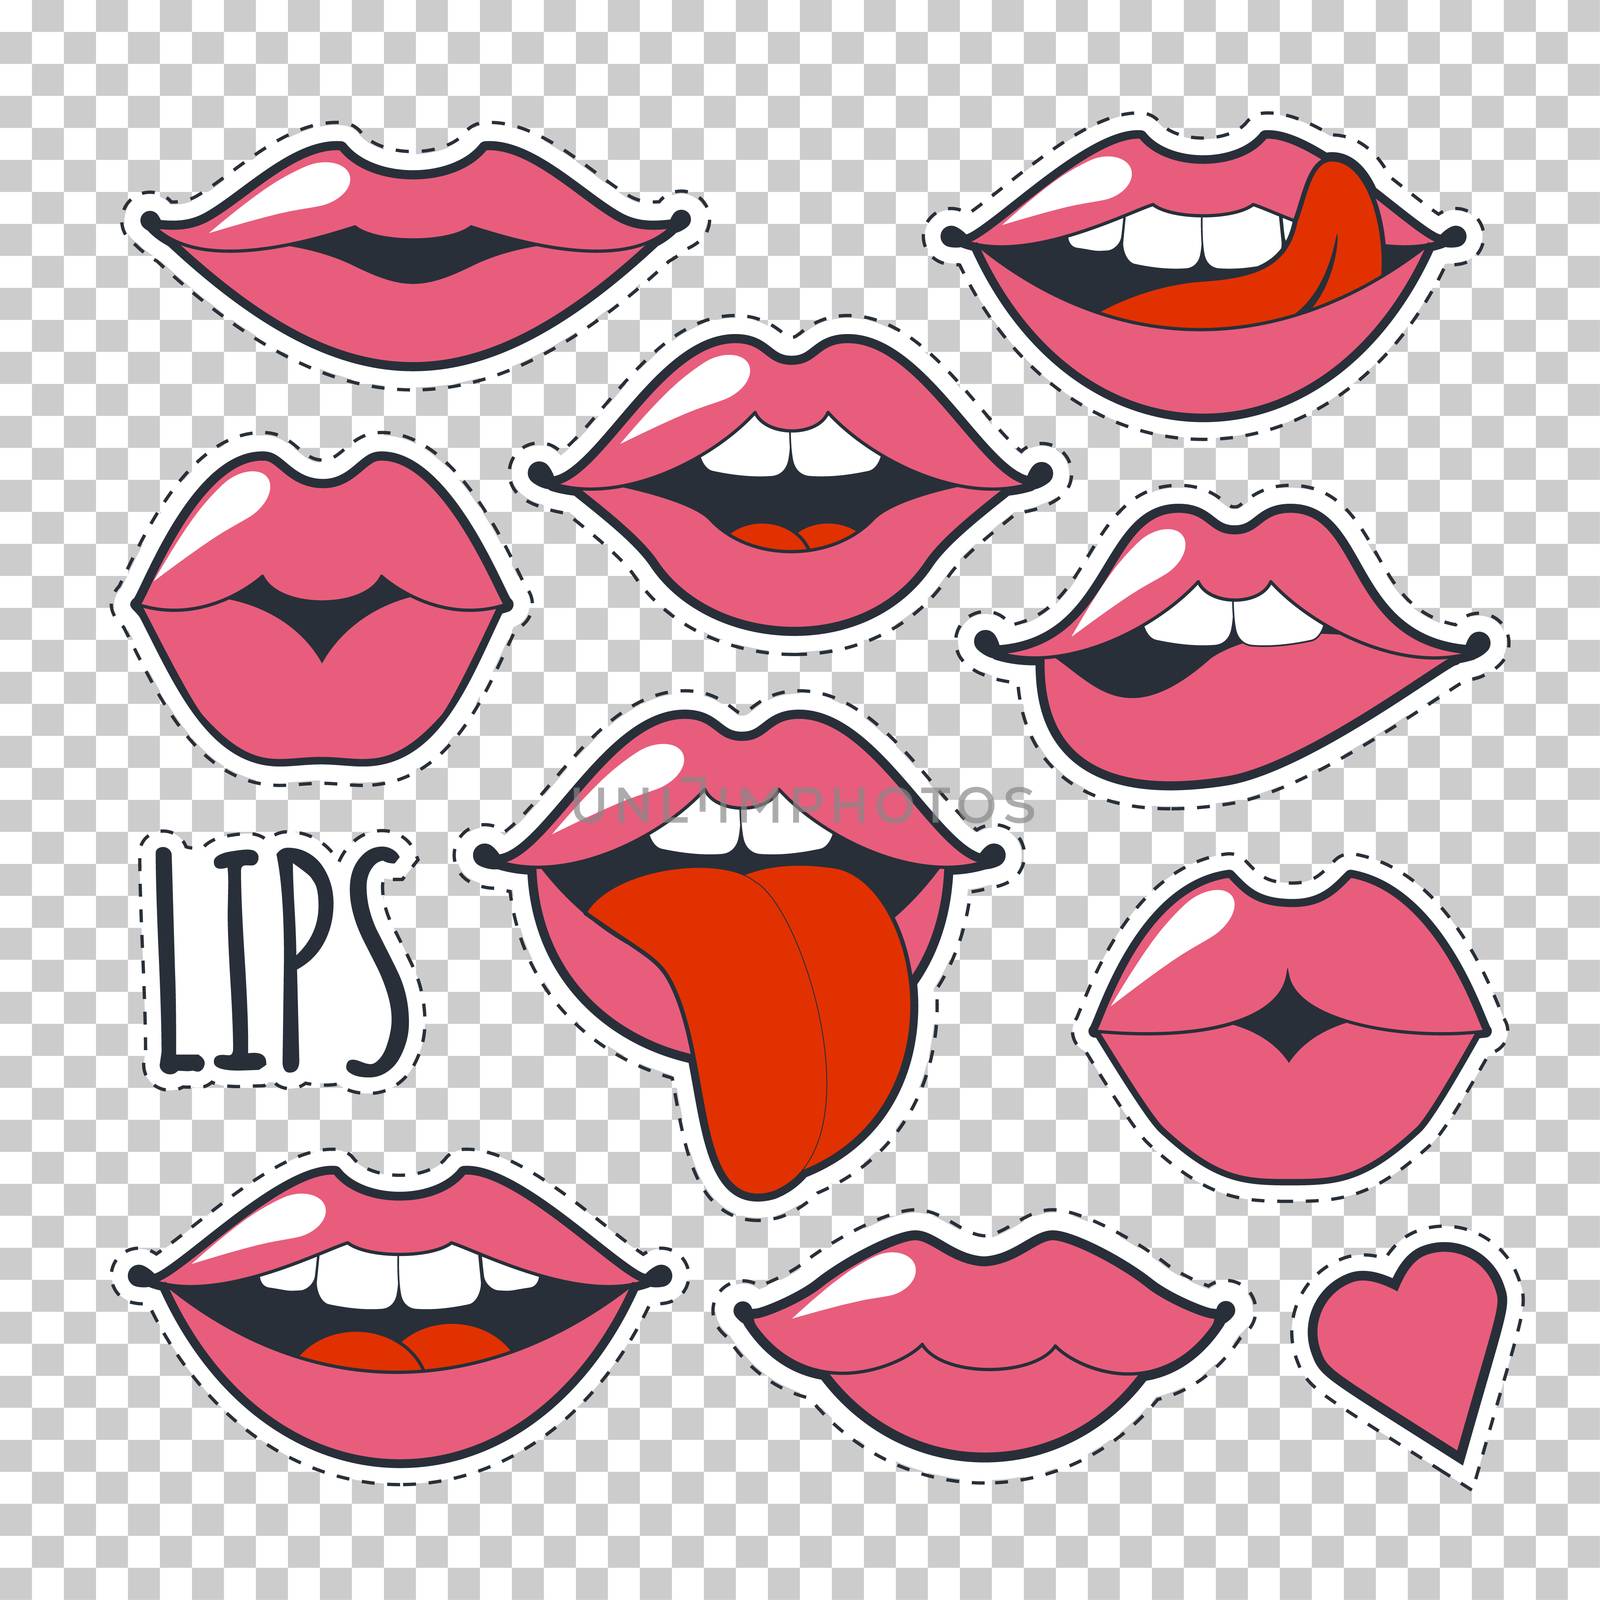 Set glamorous quirky icons. Bright pink makeup kiss mark. Passionate lips in cartoon style of the 80 s and 90 s isolated on a transparent background. Fashion patch badges with lips.